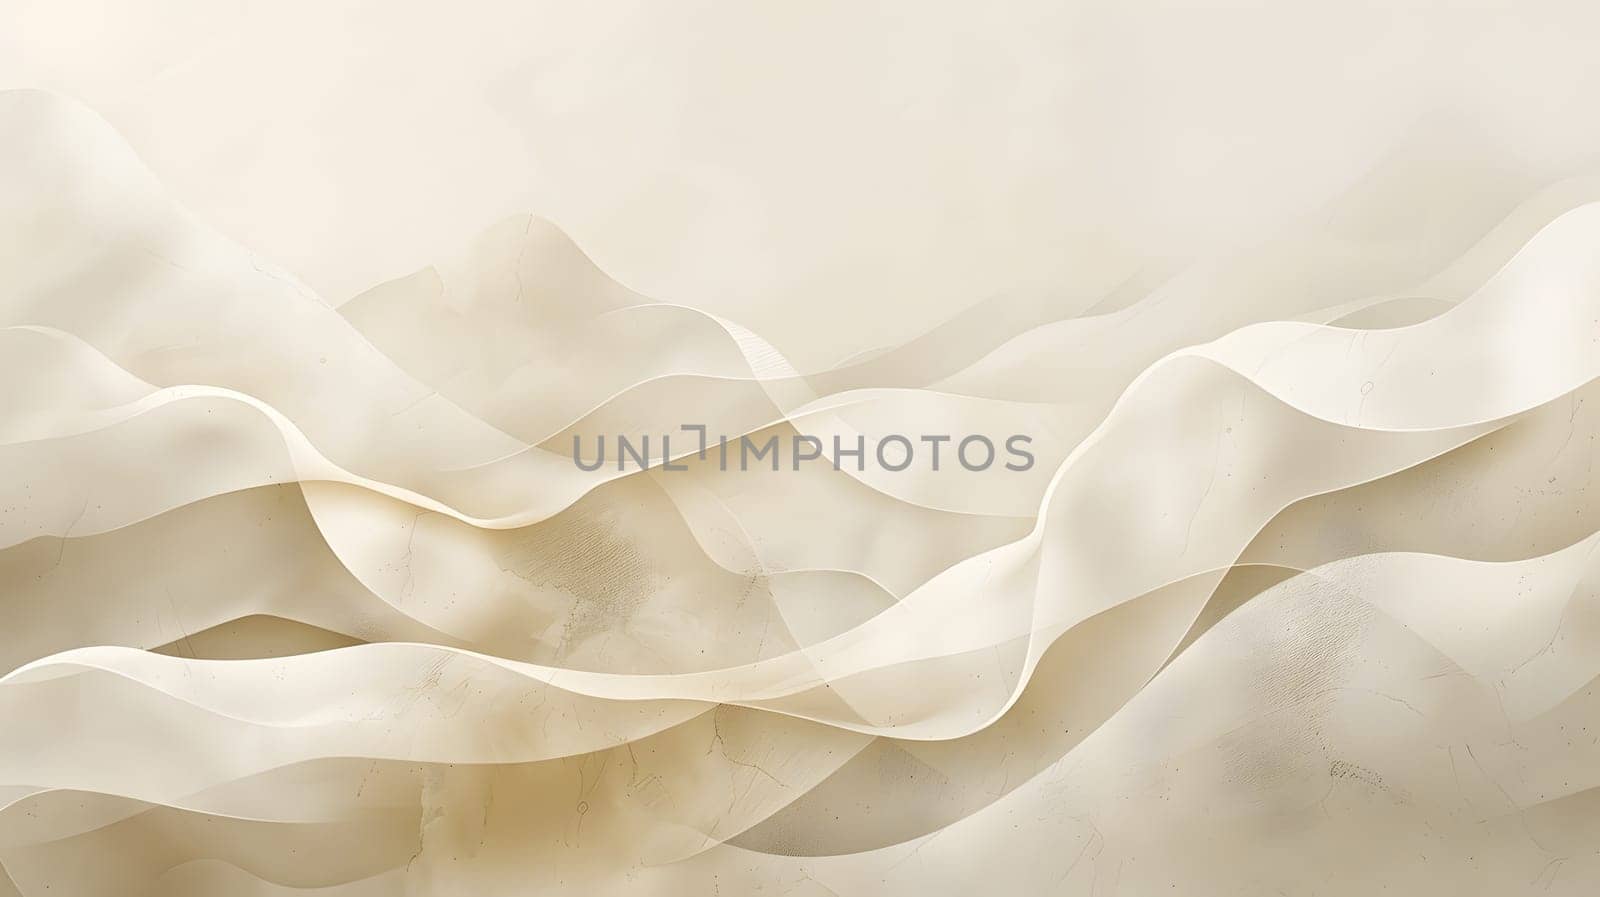 A closeup of beige linen with delicate waves, resembling petals of a flower in the rose family. Perfect for a special event or elegant cuisine dish presentation